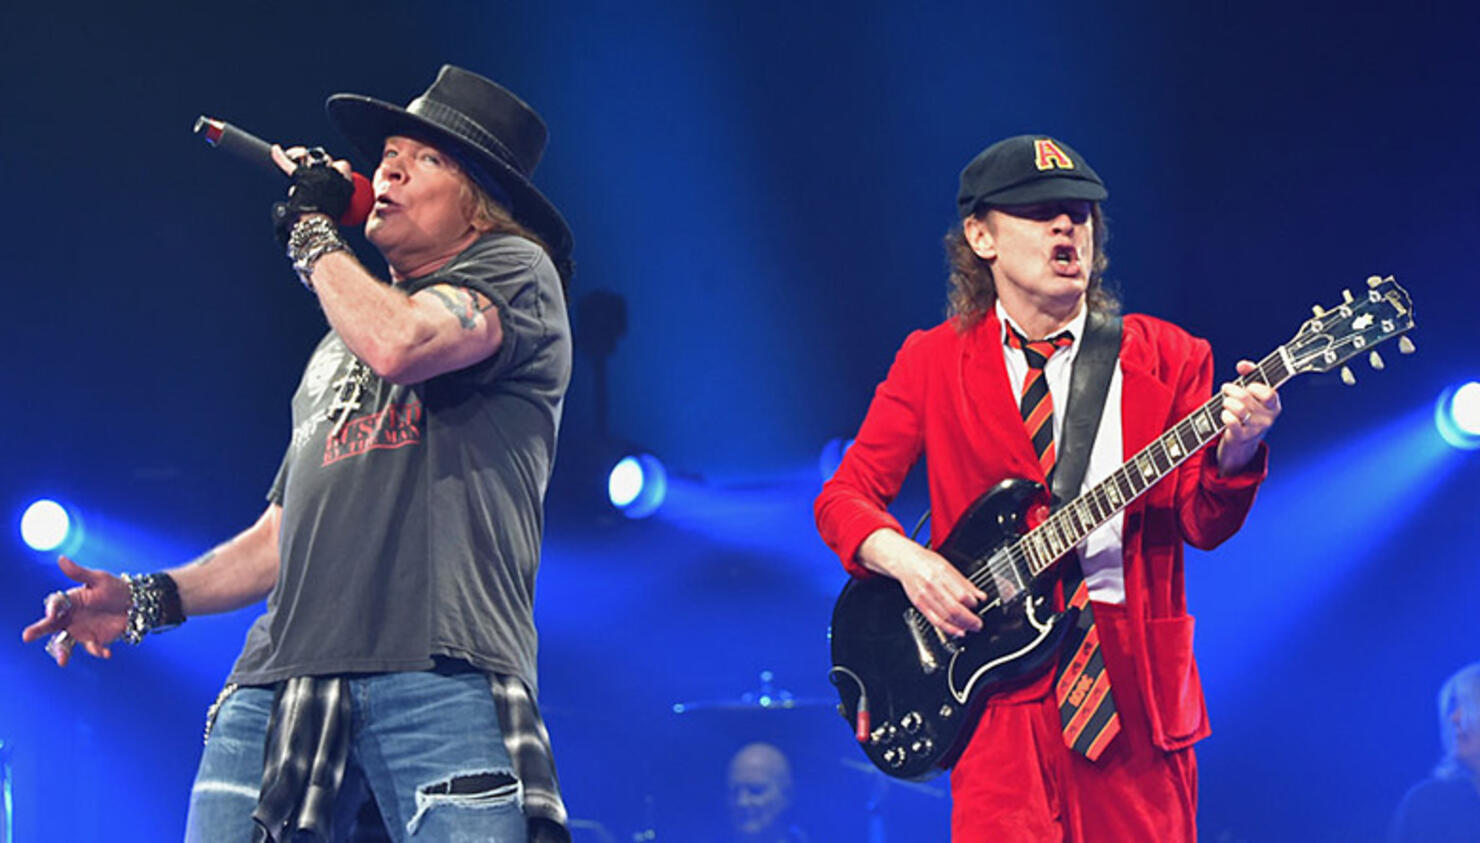 munching Lada Pioner Guns N' Roses Tour Manager Instagram Post Fuels Axl Rose-AC/DC Speculation  | iHeart